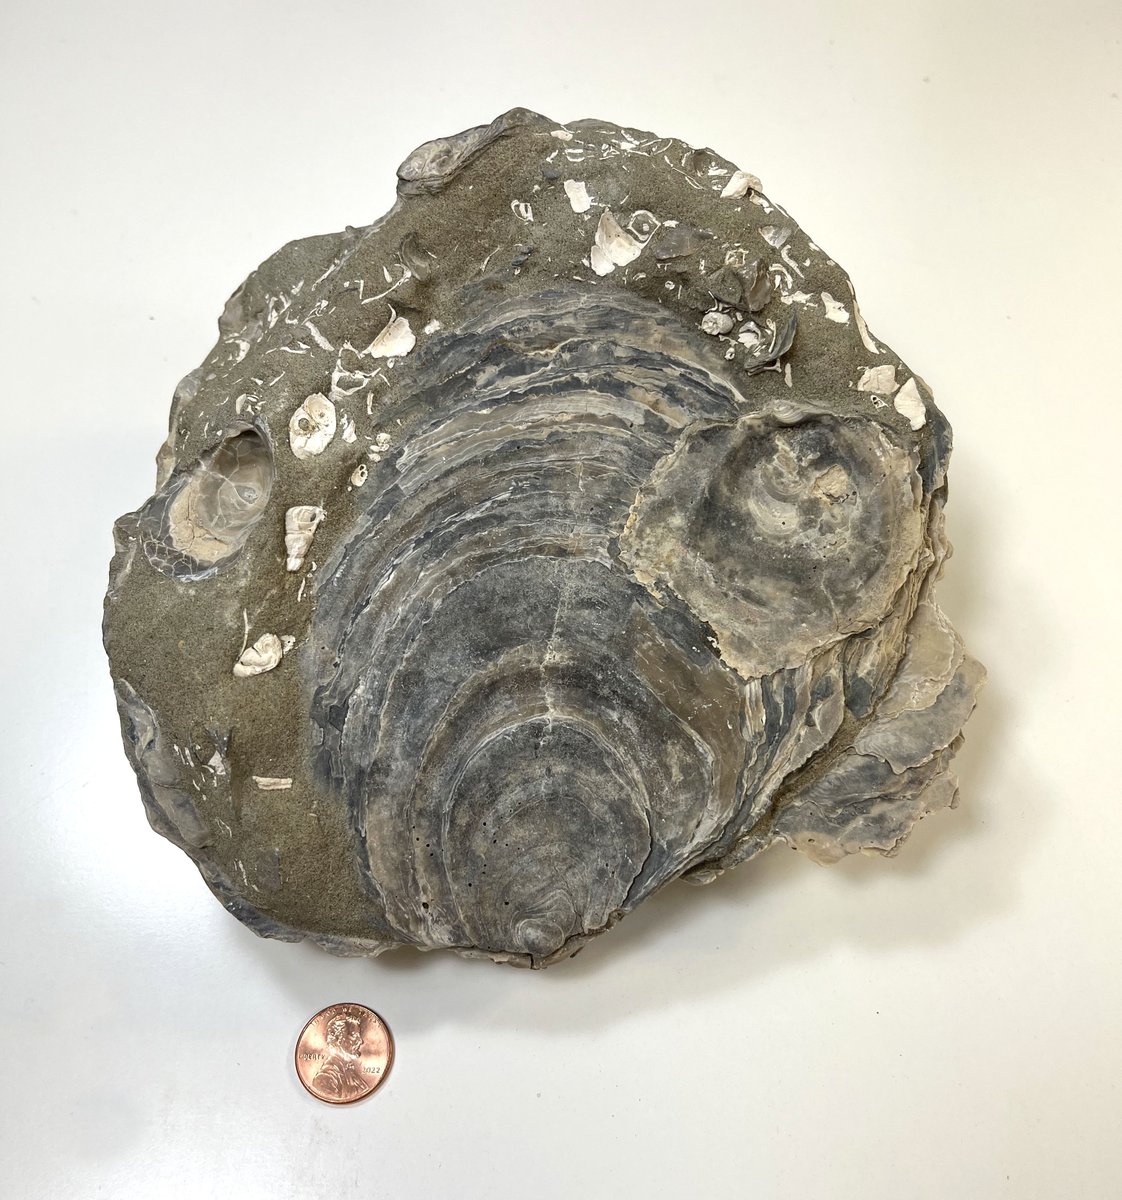 This extra-large shell is the fossil of an extinct oyster from Virginia! Because of their thick, sturdy shells, oysters are common in the fossil record, and certain species are particularly abundant in the Late Cretaceous fossil sites of Monmouth County. #FossilFriday